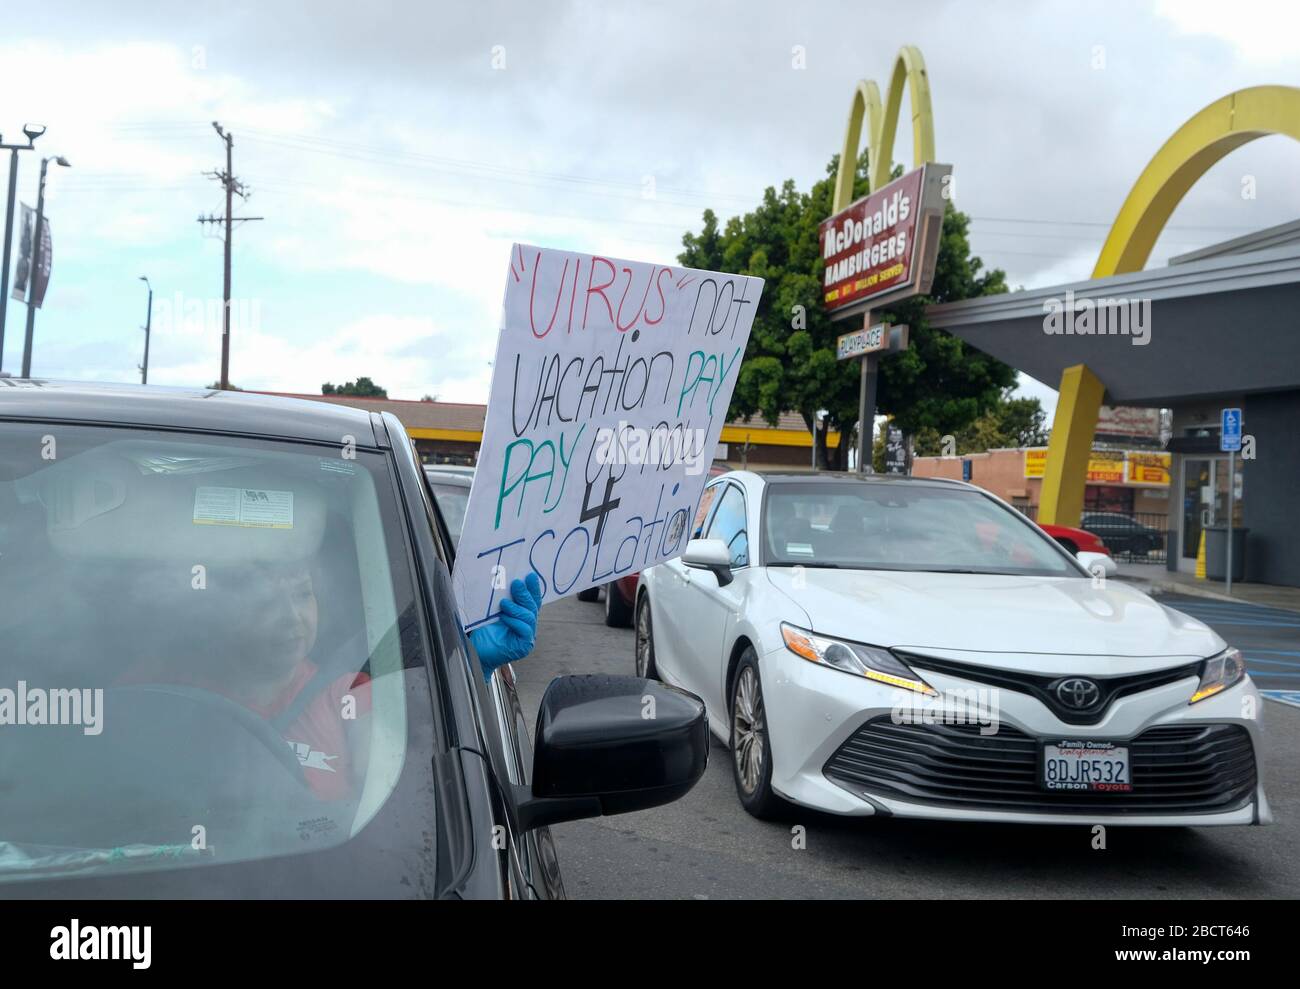 Los Angeles, California, USA. 5th Apr, 2020. A worker wearing gloves takes part in a drive-thru ''strike'' at a McDonald's restaurant on Sunday, April 5, 2020 in Los Angeles. The workers are demanding a two-week quarantine period, with full pay for a co-worker who tested positive for COVID-19. Credit: Ringo Chiu/ZUMA Wire/Alamy Live News Stock Photo